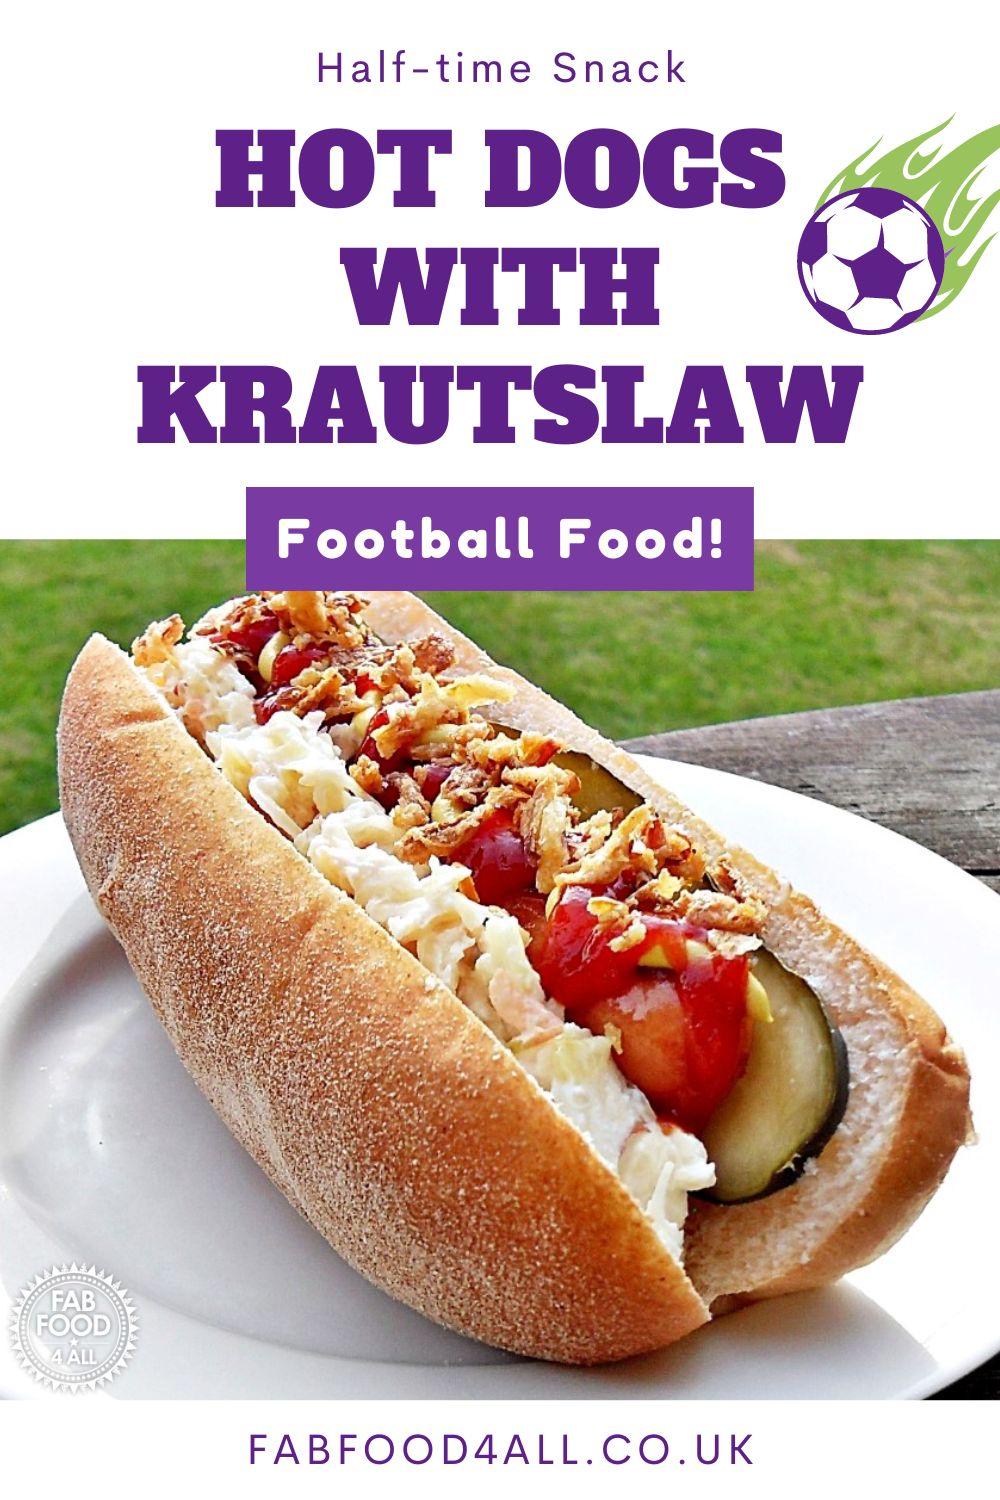 Hot Dogs with Krautslaw Pinterest image